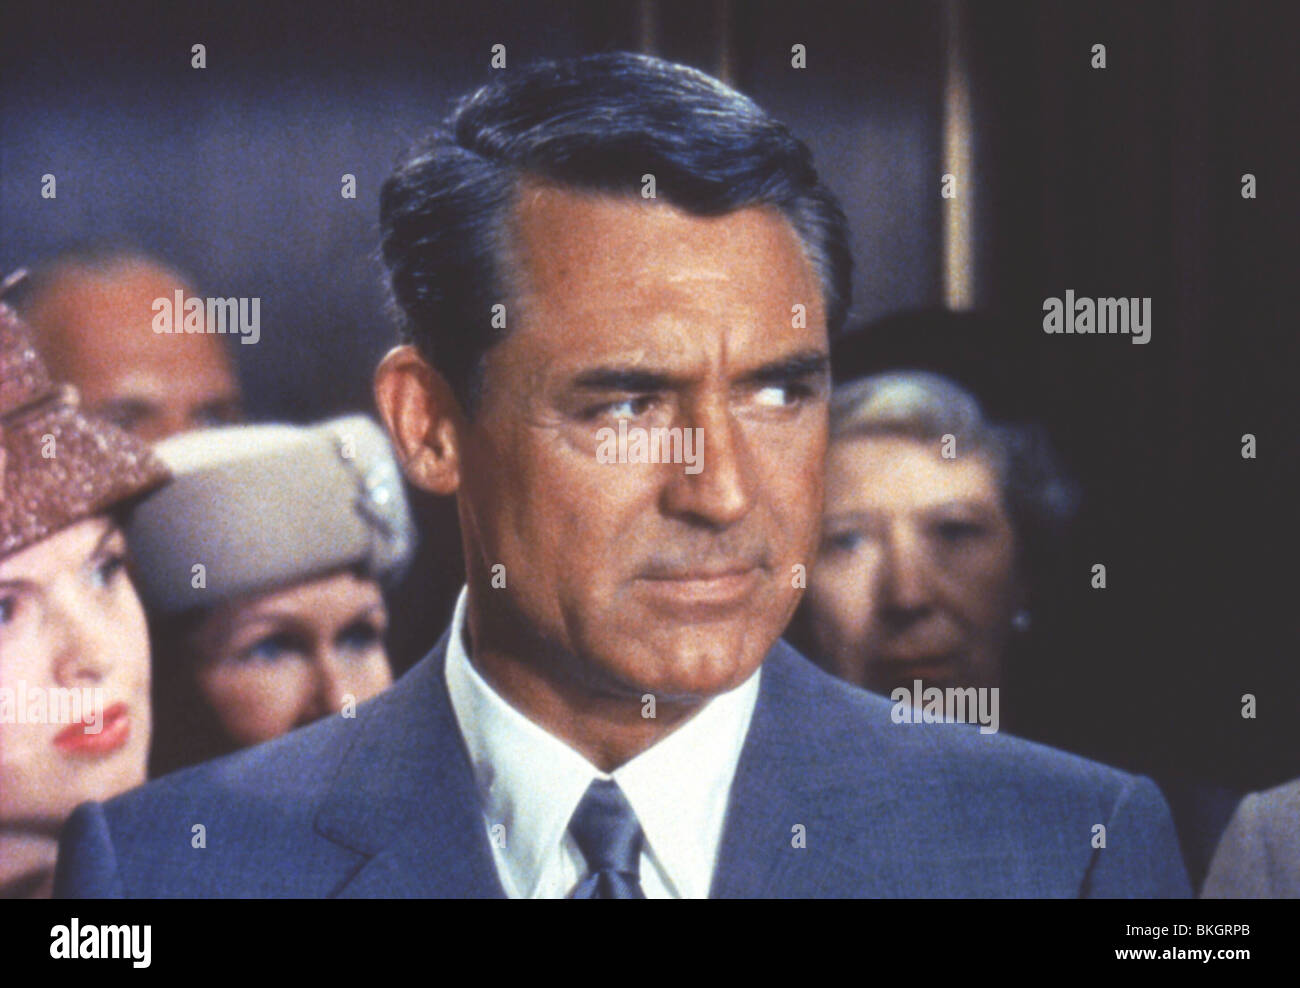 NORTH BY NORTHWEST (1959) CARY GRANT NBNW 001-002 Stock Photo